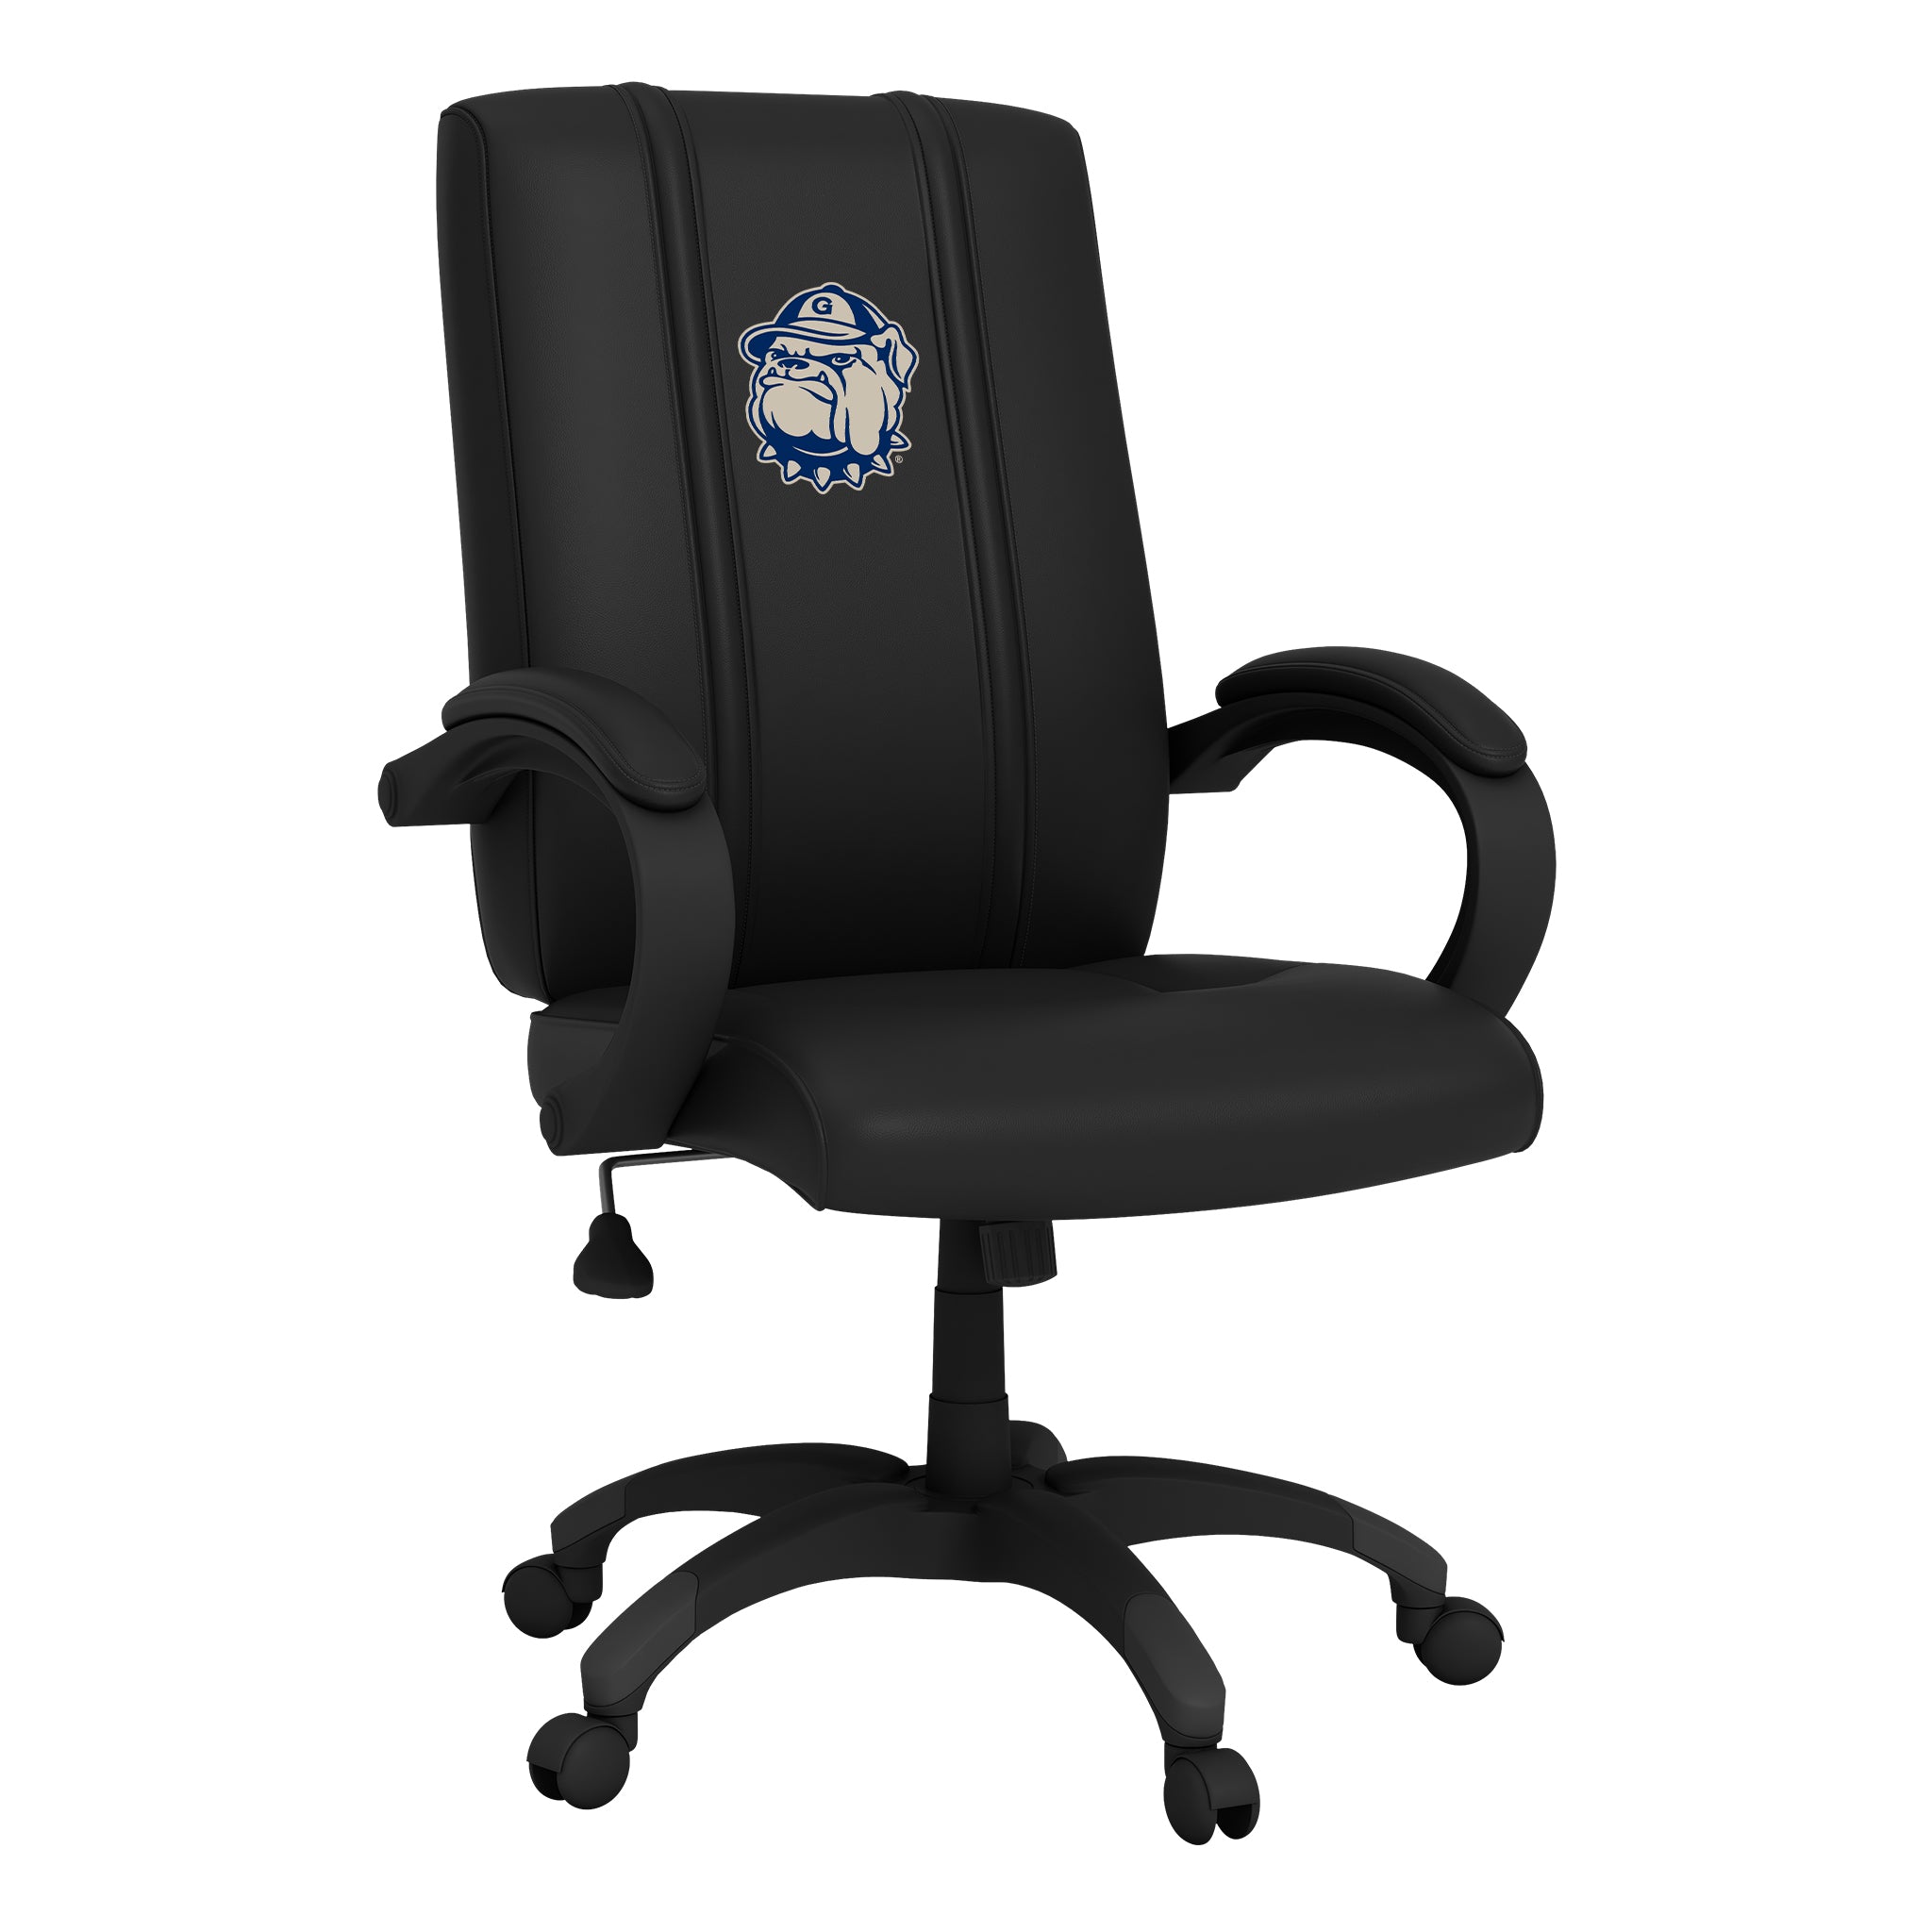 Georgetown Hoyas Office Chair 1000 with Georgetown Hoyas Secondary